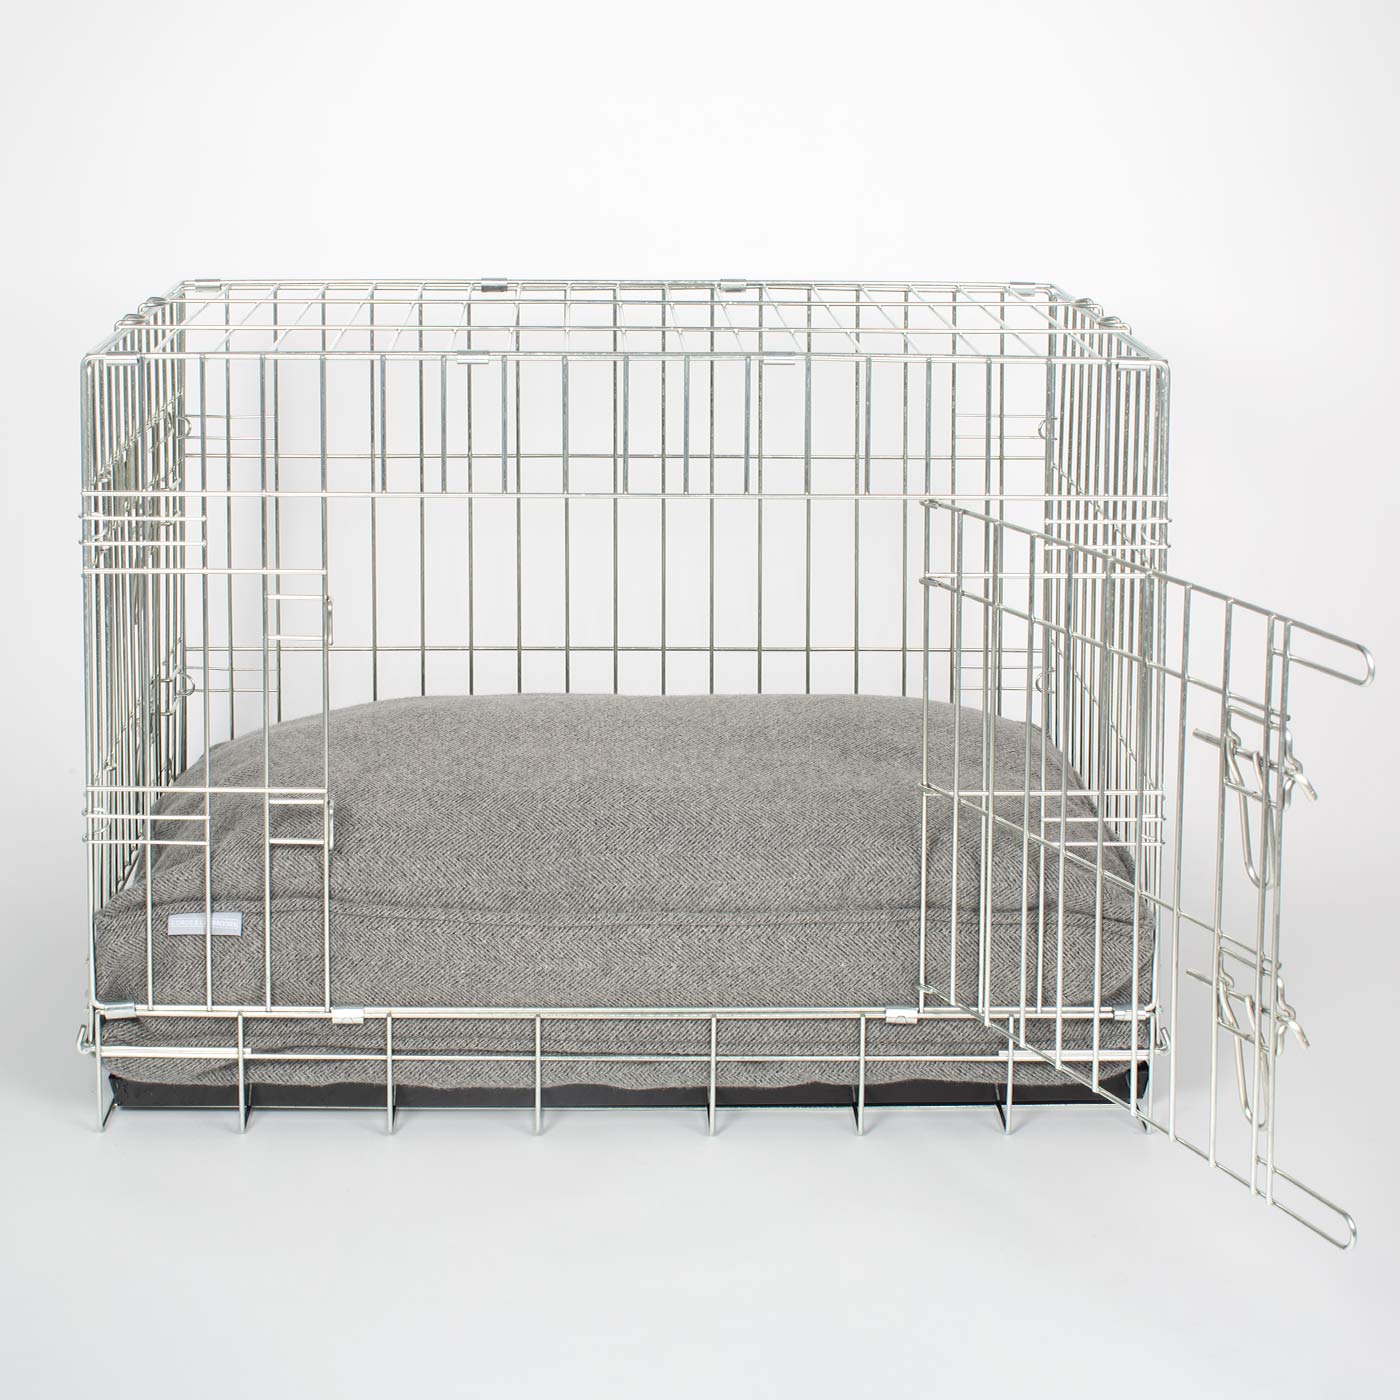 Luxury Dog Cage Cushion, Pewter Herringbone Tweed Cage Cushion The Perfect Dog Cage Accessory, Available To Personalize Now at Lords & Labradors US